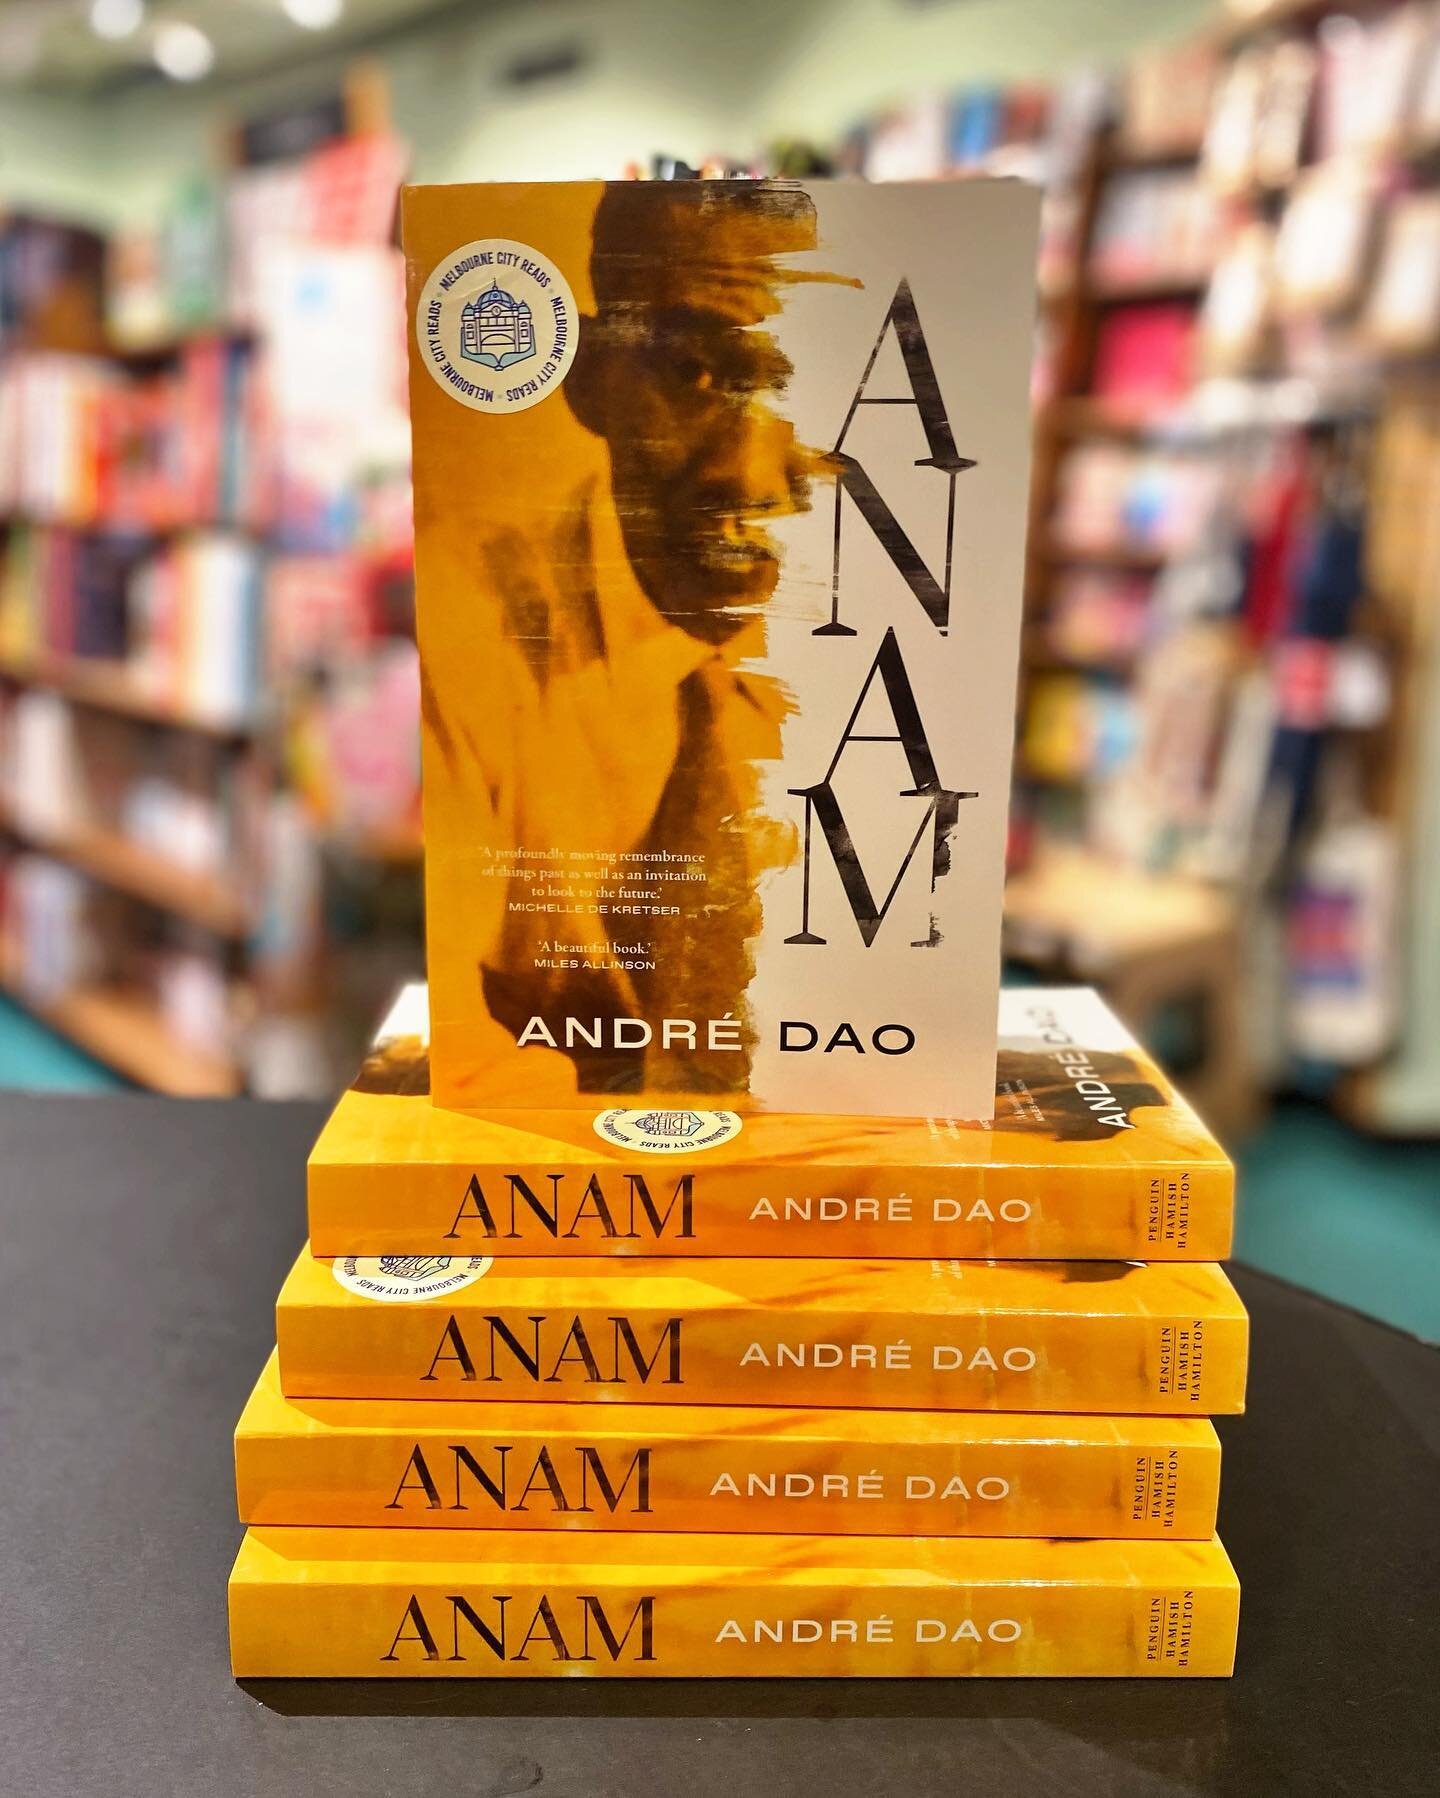 Our Melbourne City Reads book of the month is the incredible 'Anam' by Andr&eacute; Dao. 

This genre-defying novel about the far-reaching legacy of the past on future generations encompasses many things. It is in equal measure moving and illuminatin